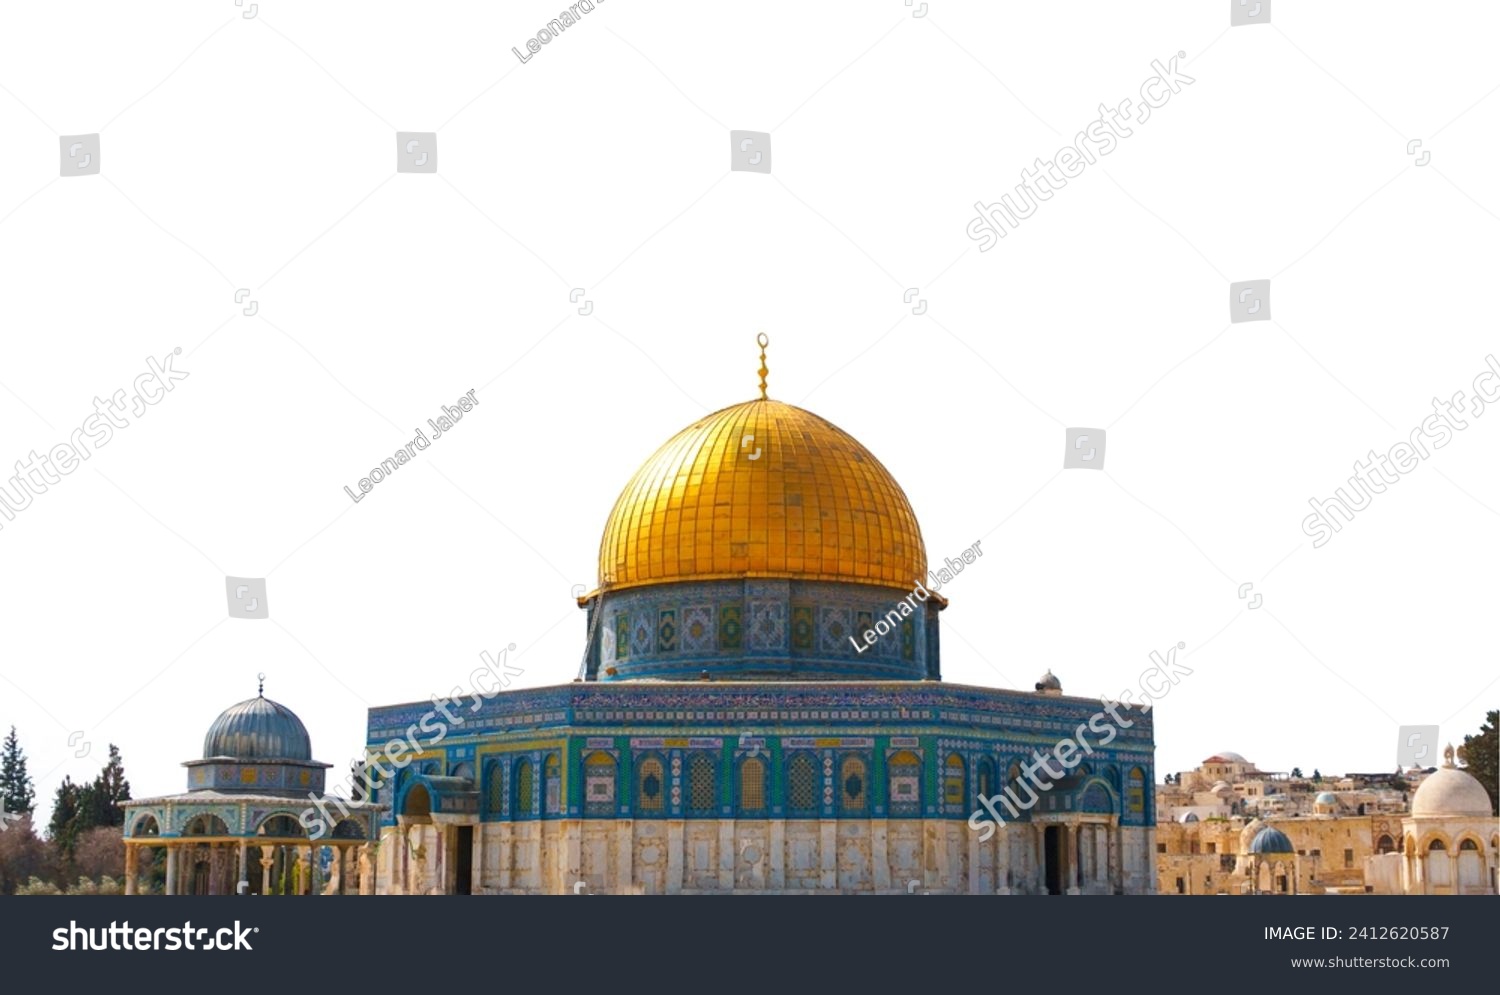 The Dome of the rock, Al-Aqsa Mosque, Jerusalem , Palestine.isolated on white	 #2412620587